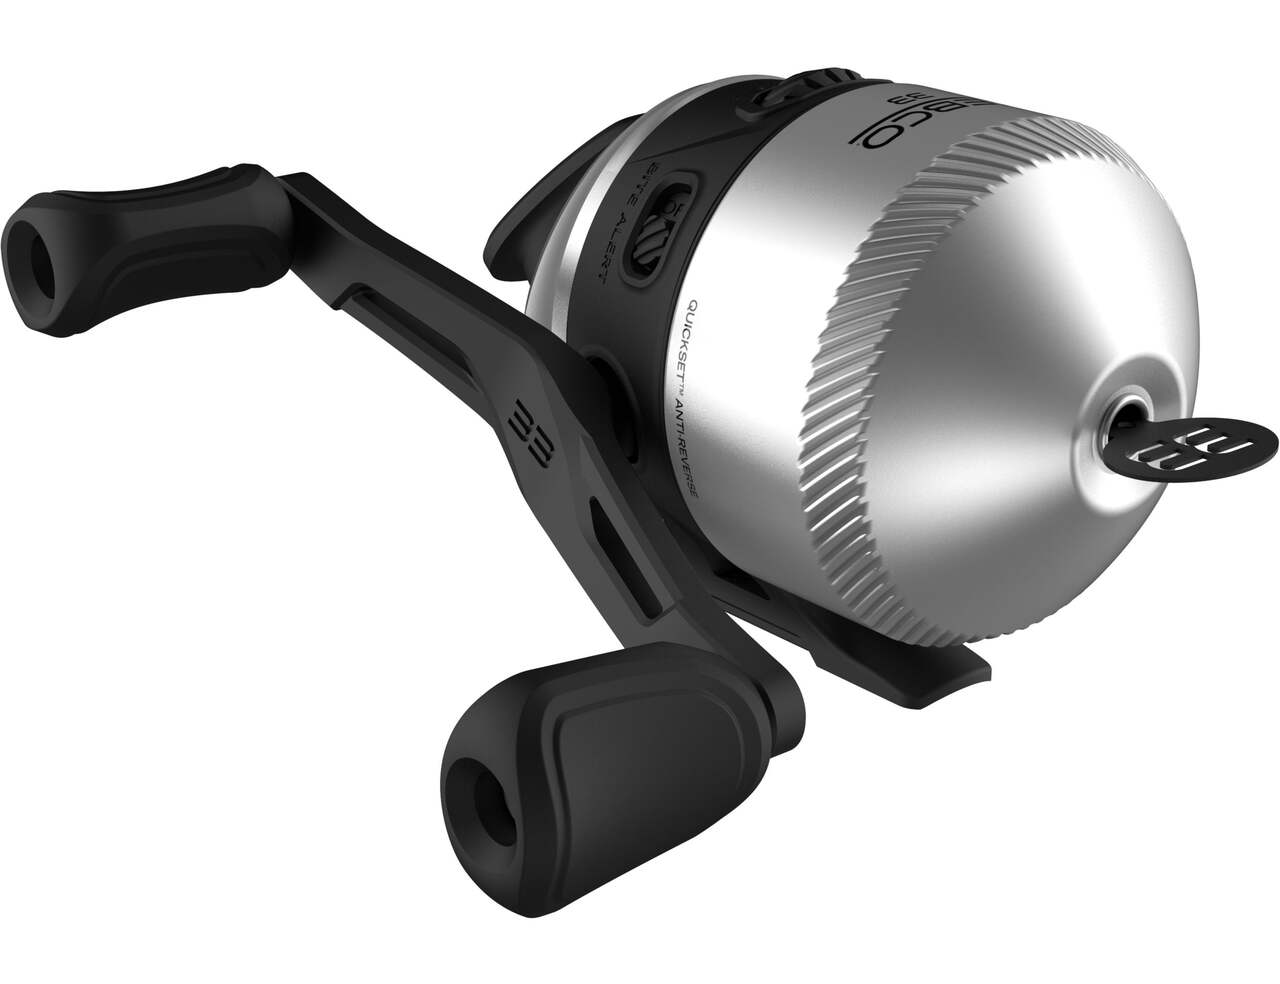 https://media-www.canadiantire.ca/product/playing/fishing/fishing-equipment/0771724/zebco-33-spincast-reel-70259a2a-e81a-4c84-acbd-91dcb3b77a42-jpgrendition.jpg?imdensity=1&imwidth=1244&impolicy=mZoom